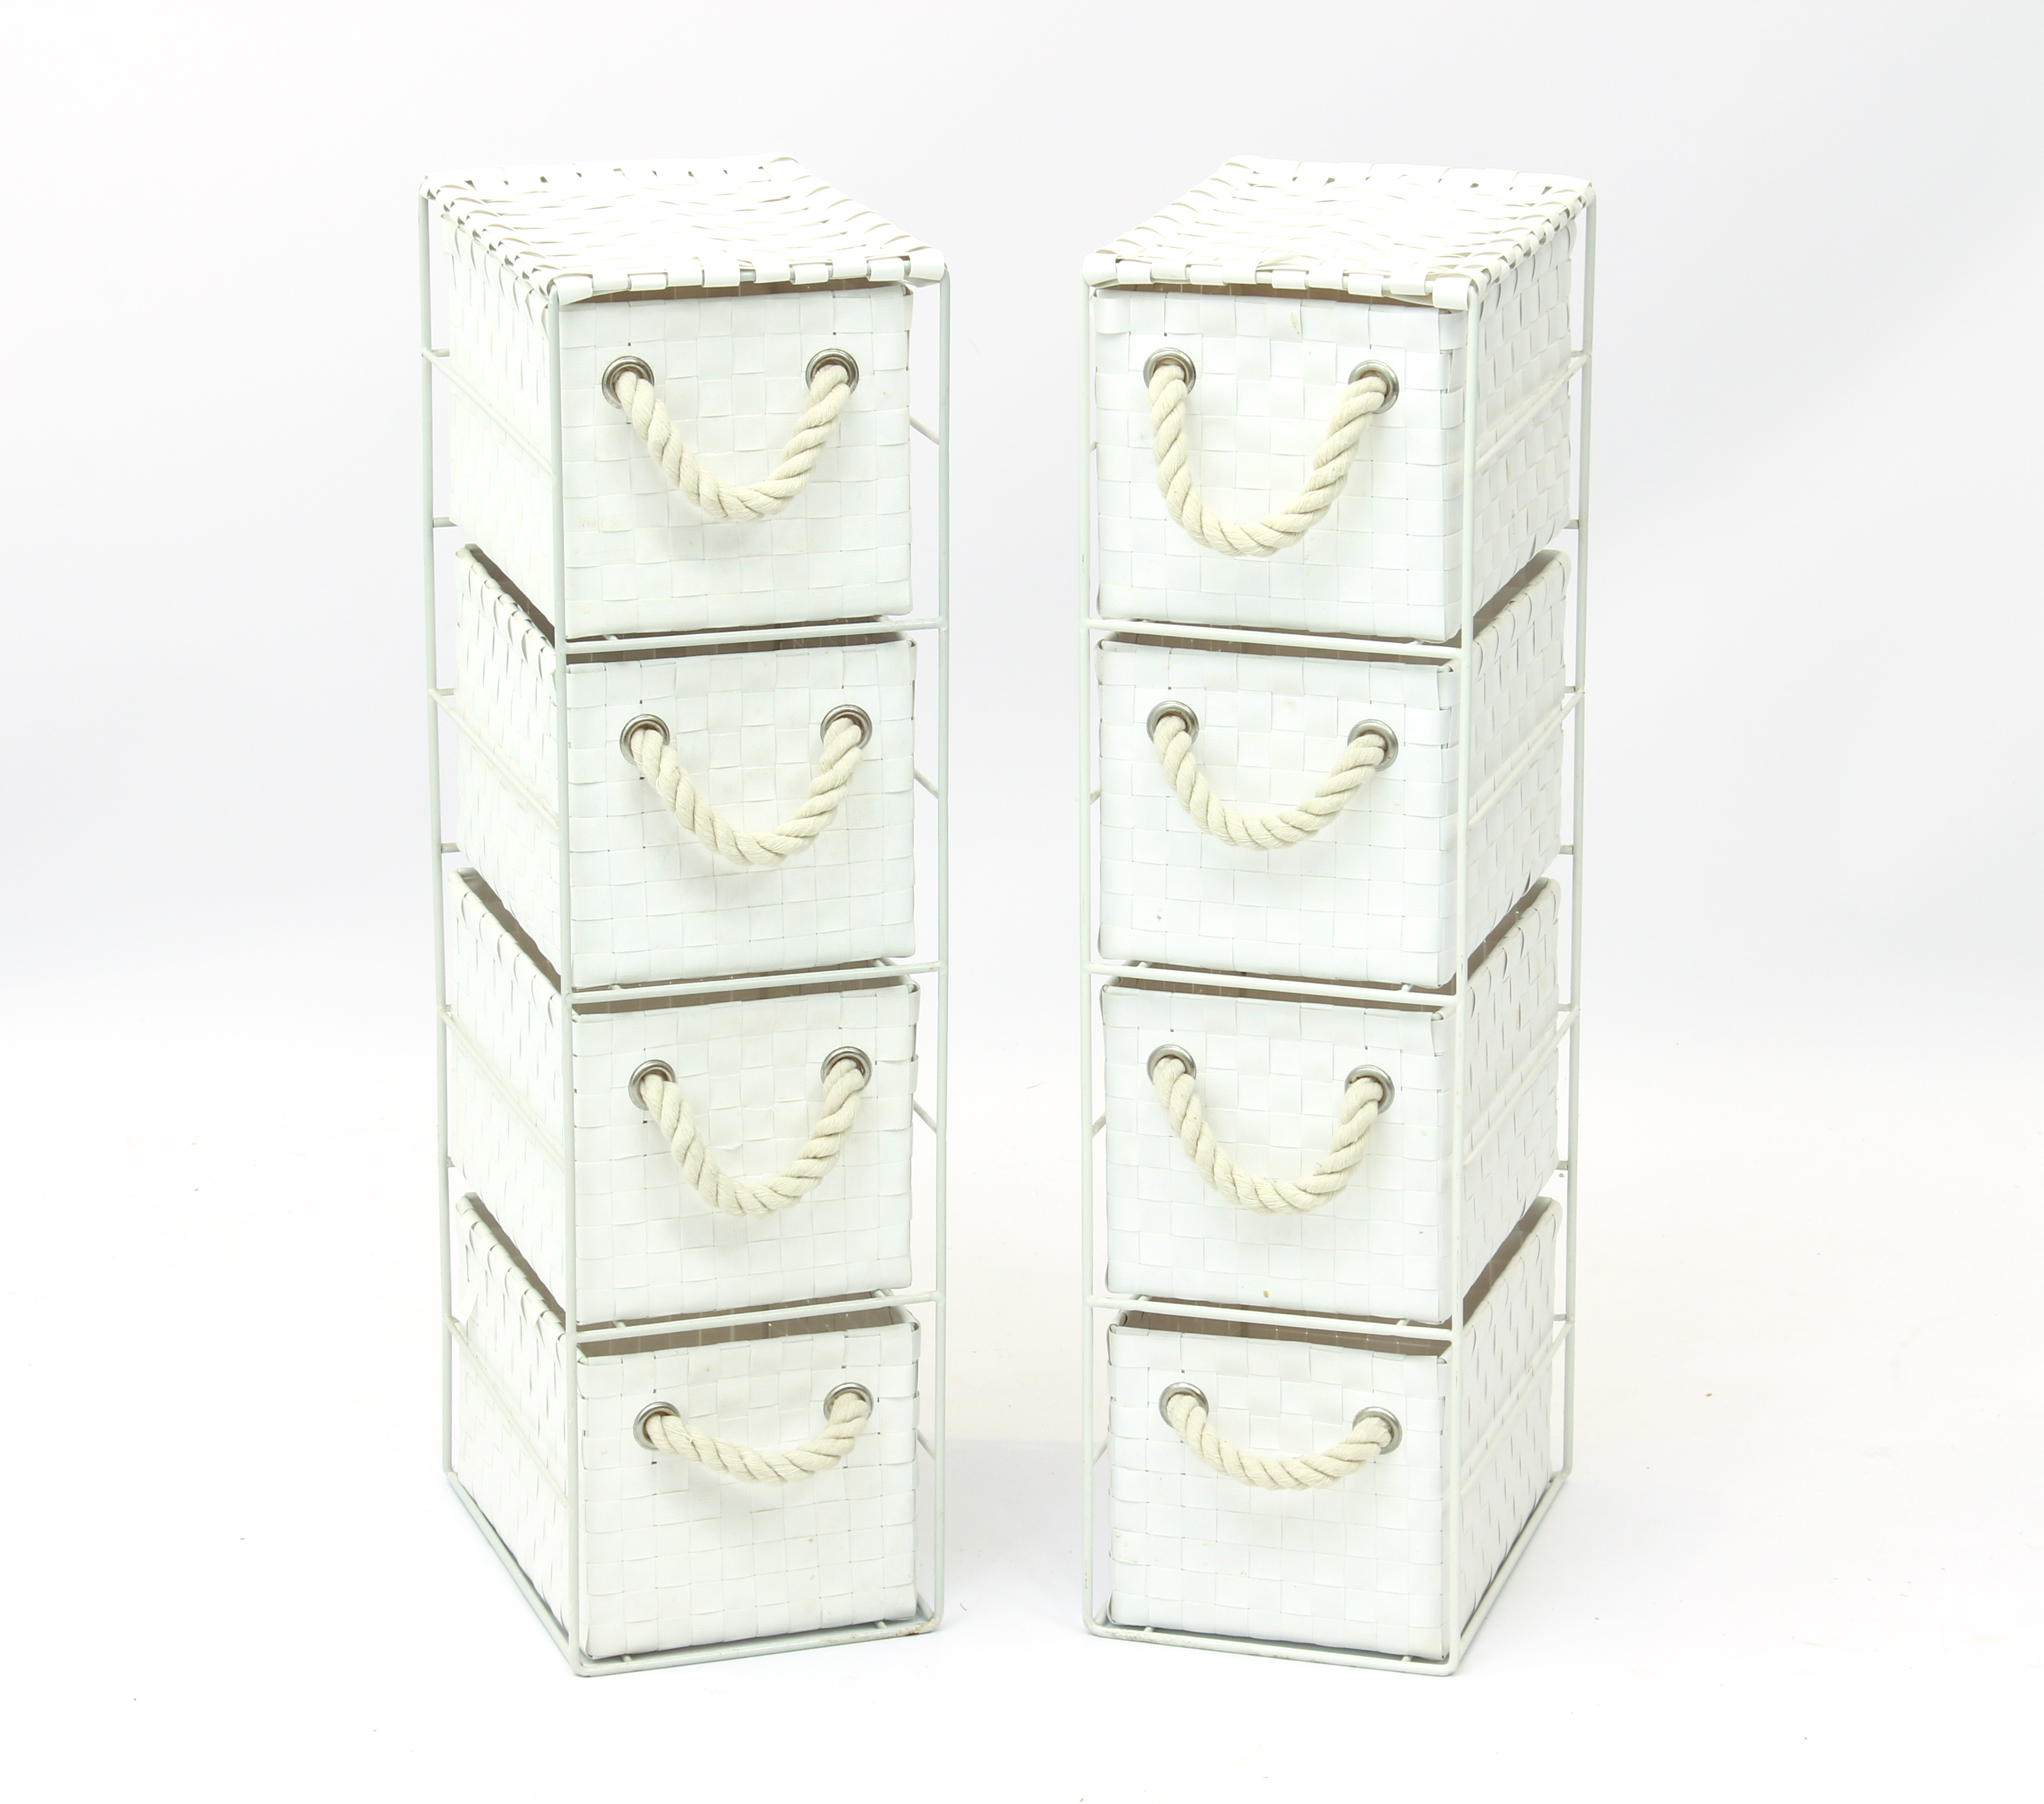 A pair of small white rattan style four drawer units - woven white plastic with rope handles, wire